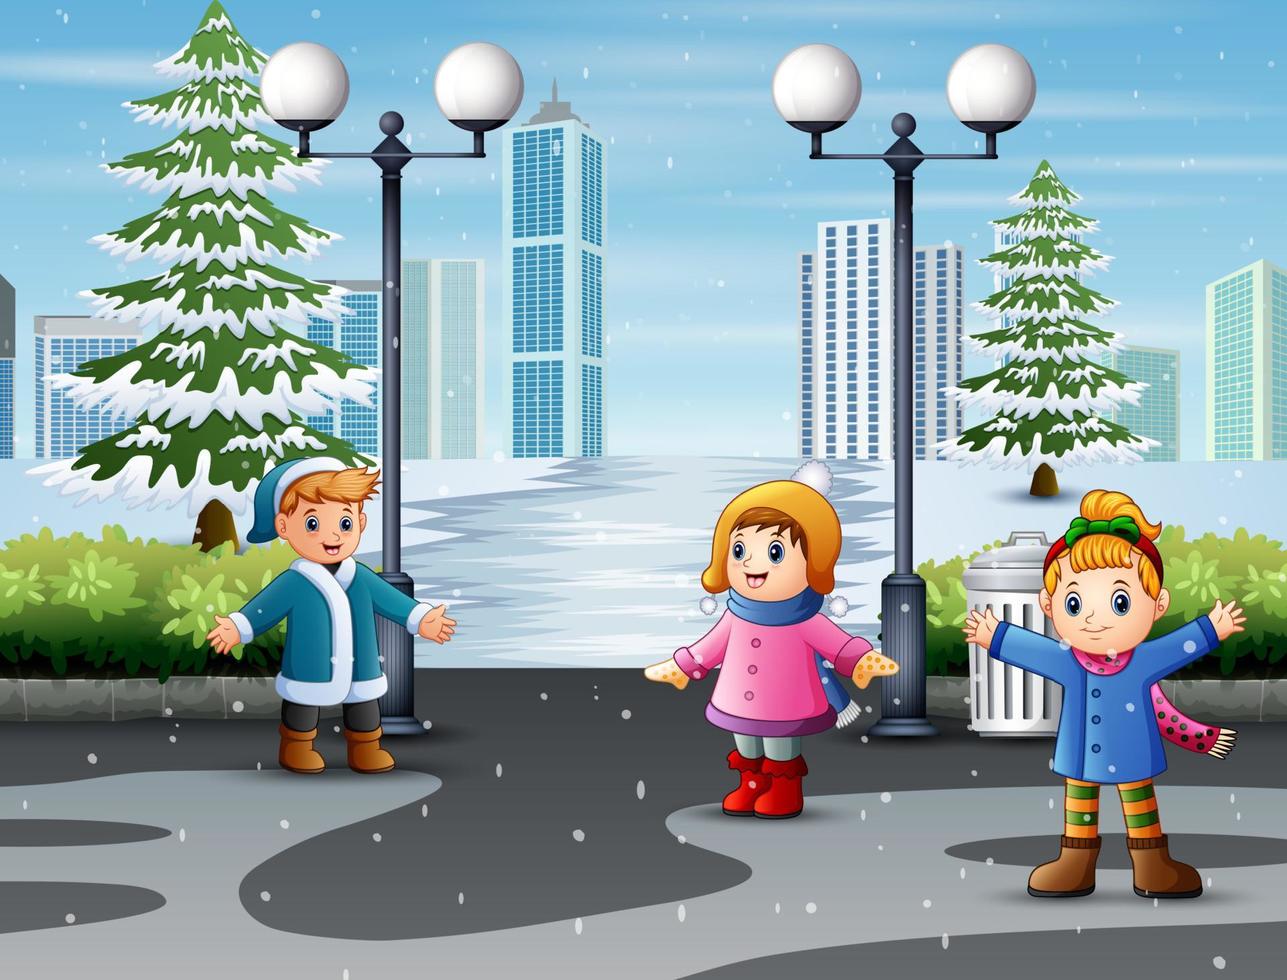 Happy children meeting with friends in natural snowy park vector